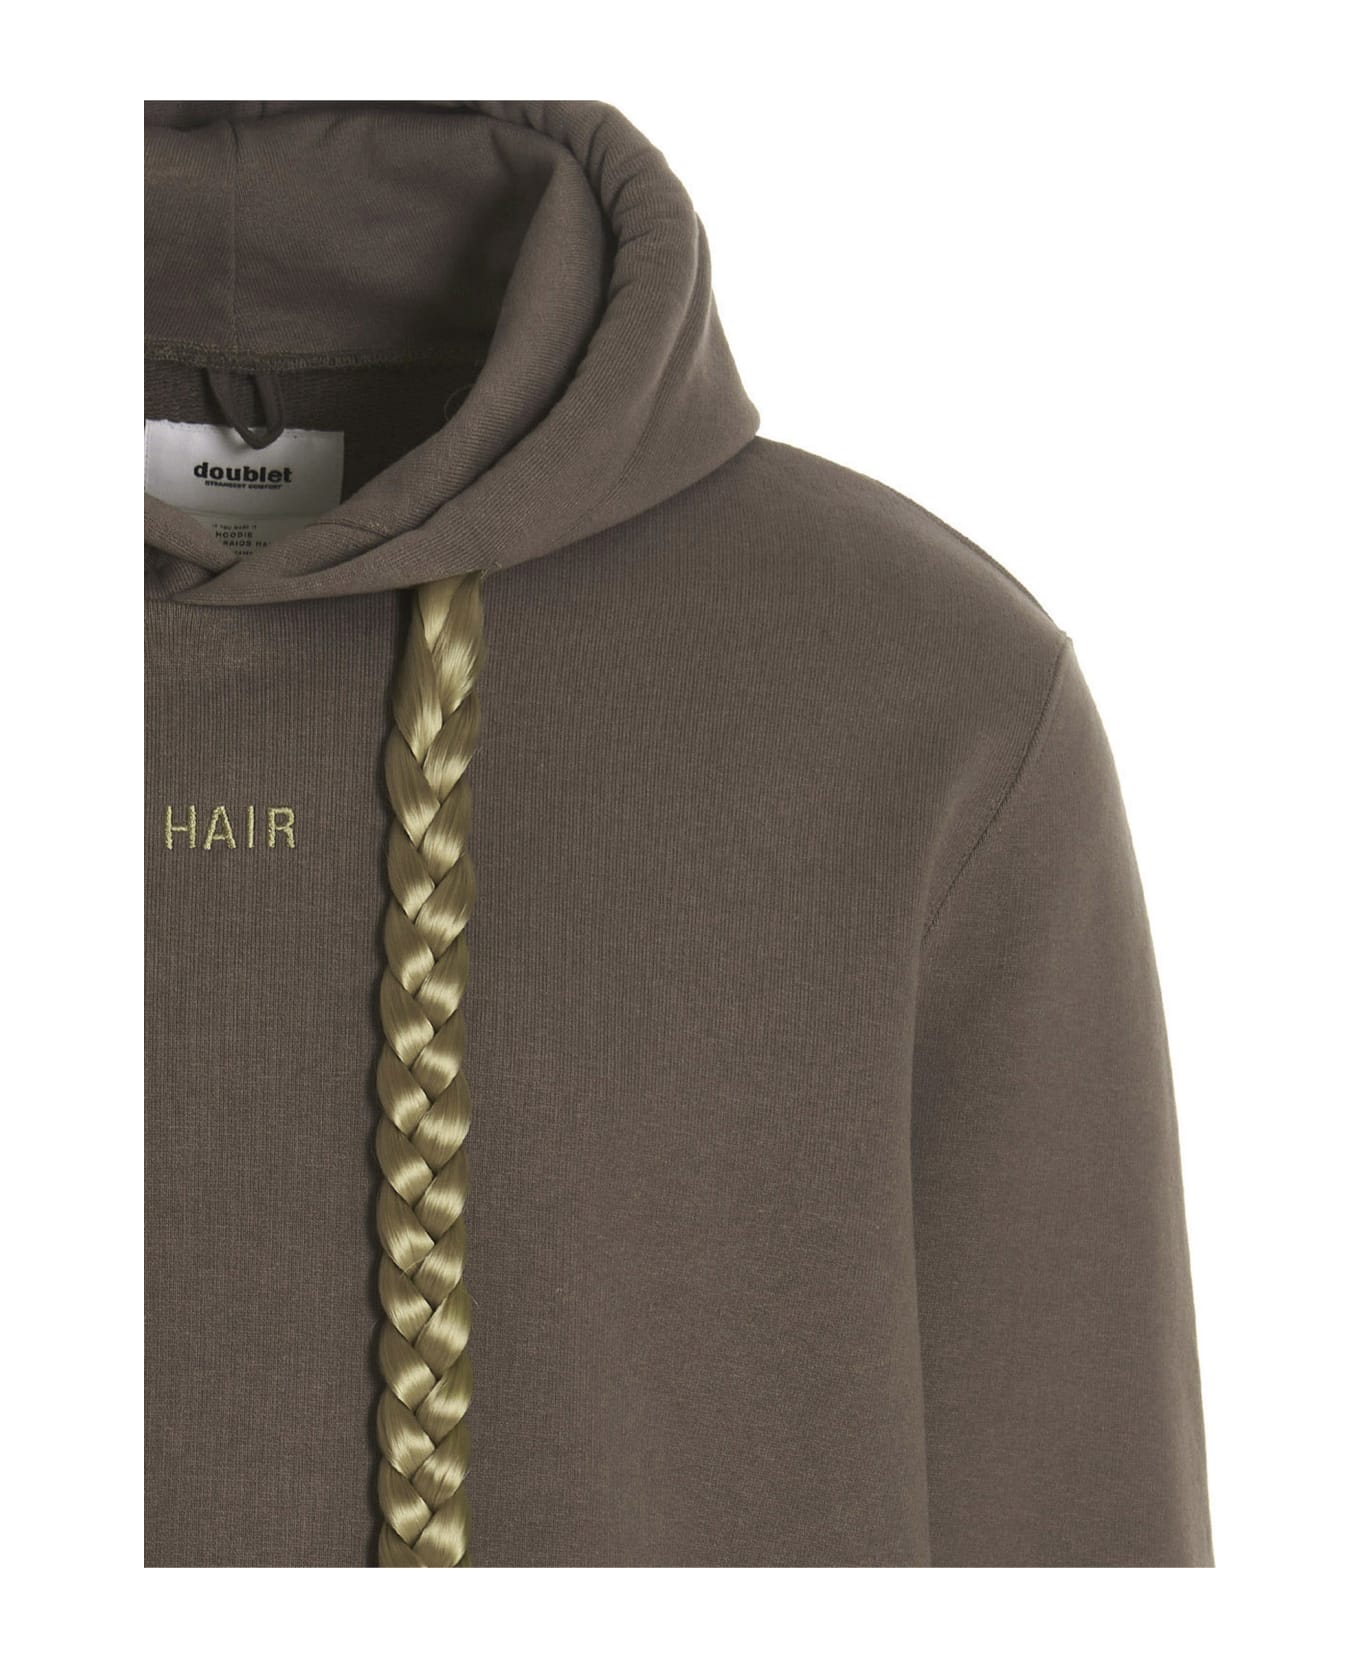 doublet 'with Braids Hair' Hoodie - Gray